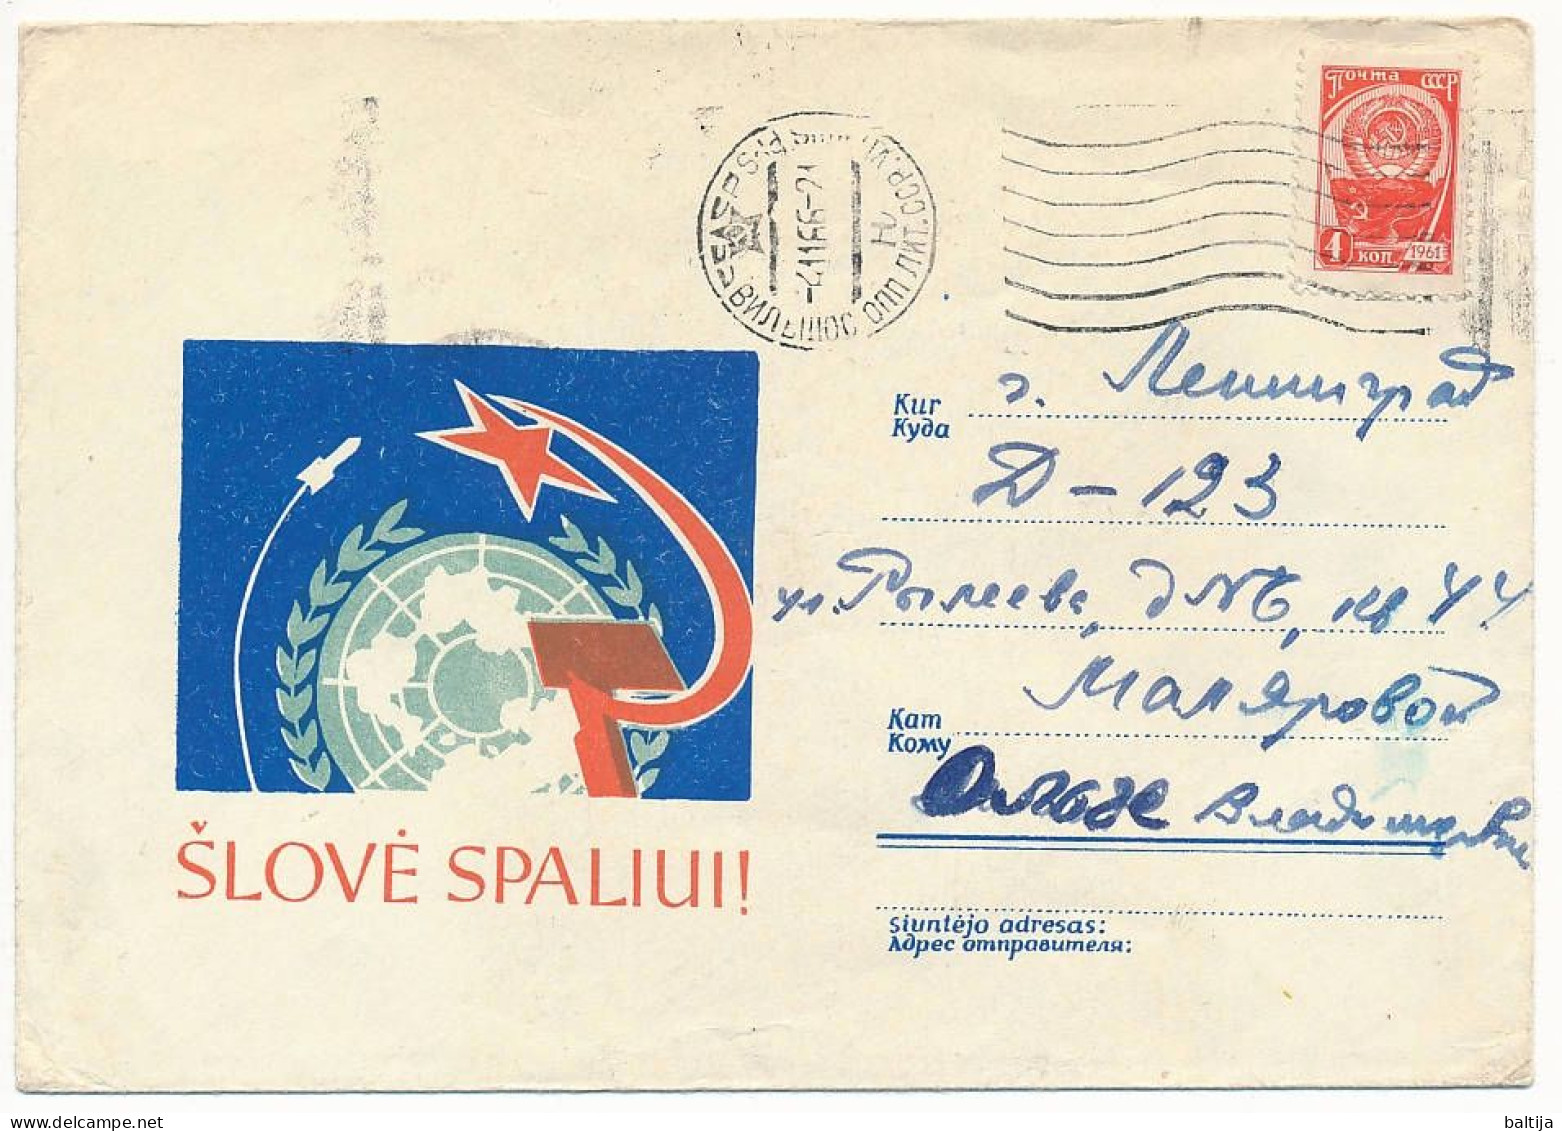 Solo Stationery Cover / Lituanica, Glory To October! - 4 November 1966 Vilnius, Lithuania SSR - Covers & Documents